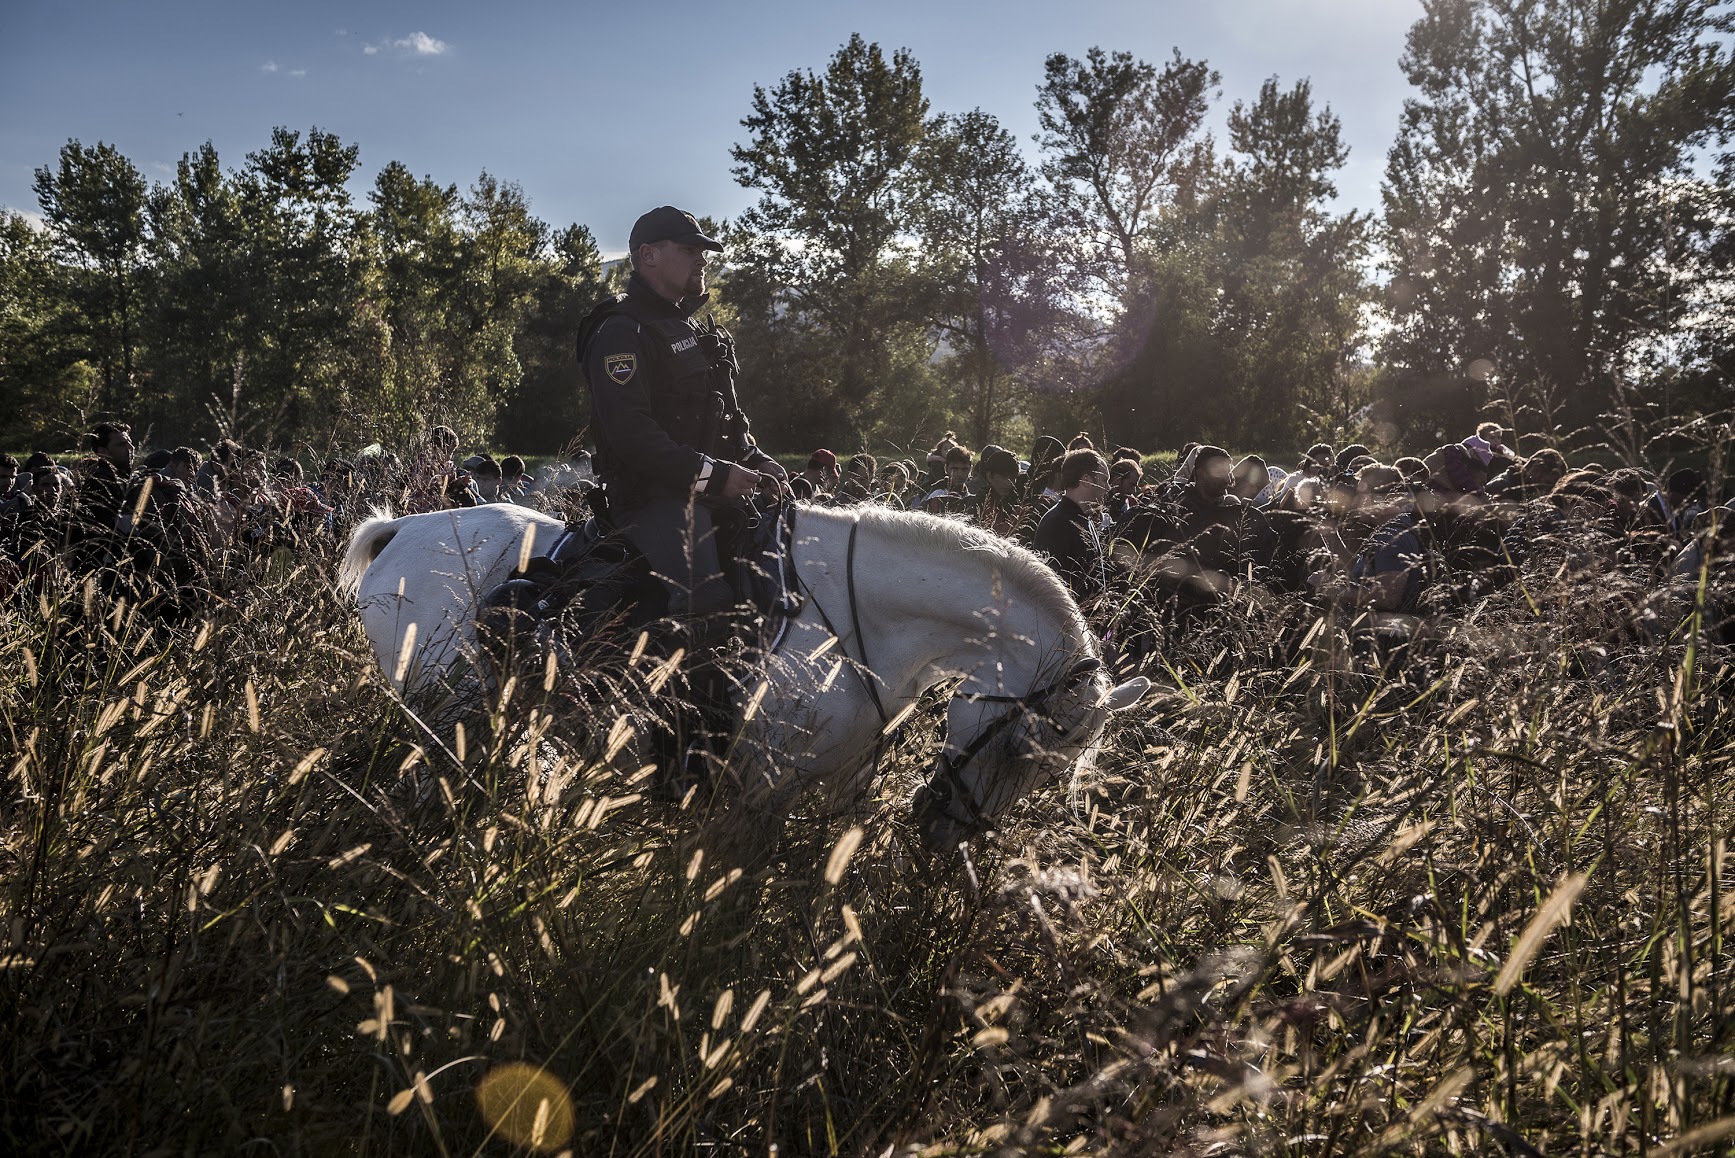 7 - A Slovenian police officer on horseback escorted migrants after they crossed from Croatia.